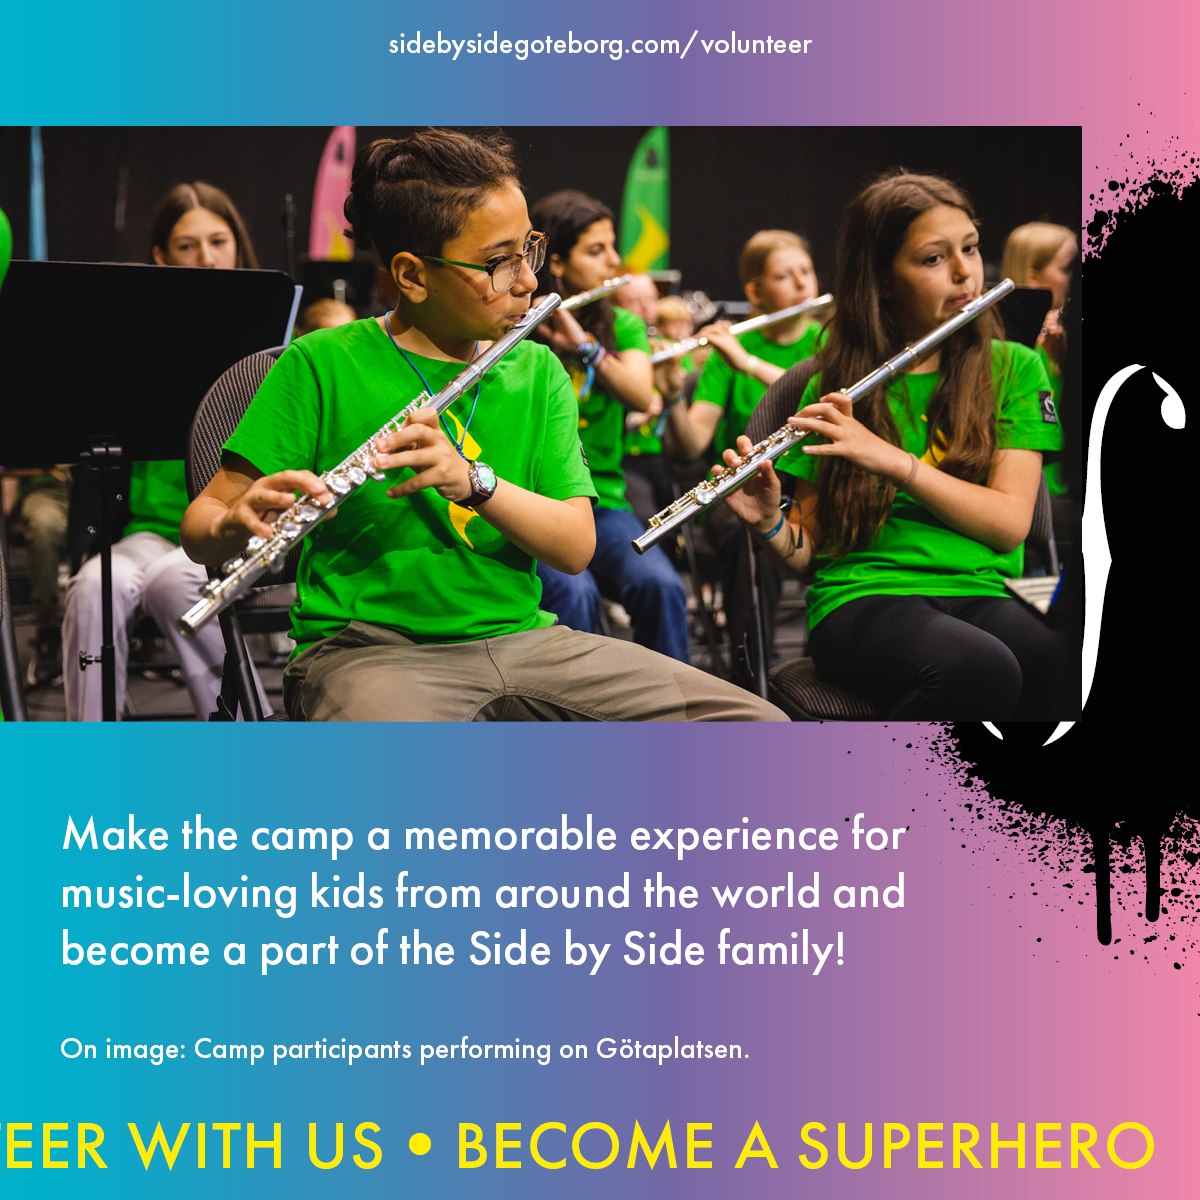 Want to be a superhero? 🦸

#Volunteer at Side by Side international #musiccamp in Gothenburg #Sweden and make the summer brighter for young #singers / #musicians from around the world!

🗓️Weeks 24–25
 🇸🇪 Some Swedish required

#musiceducation #summercamp #gbgftw @GbgSymfoniker